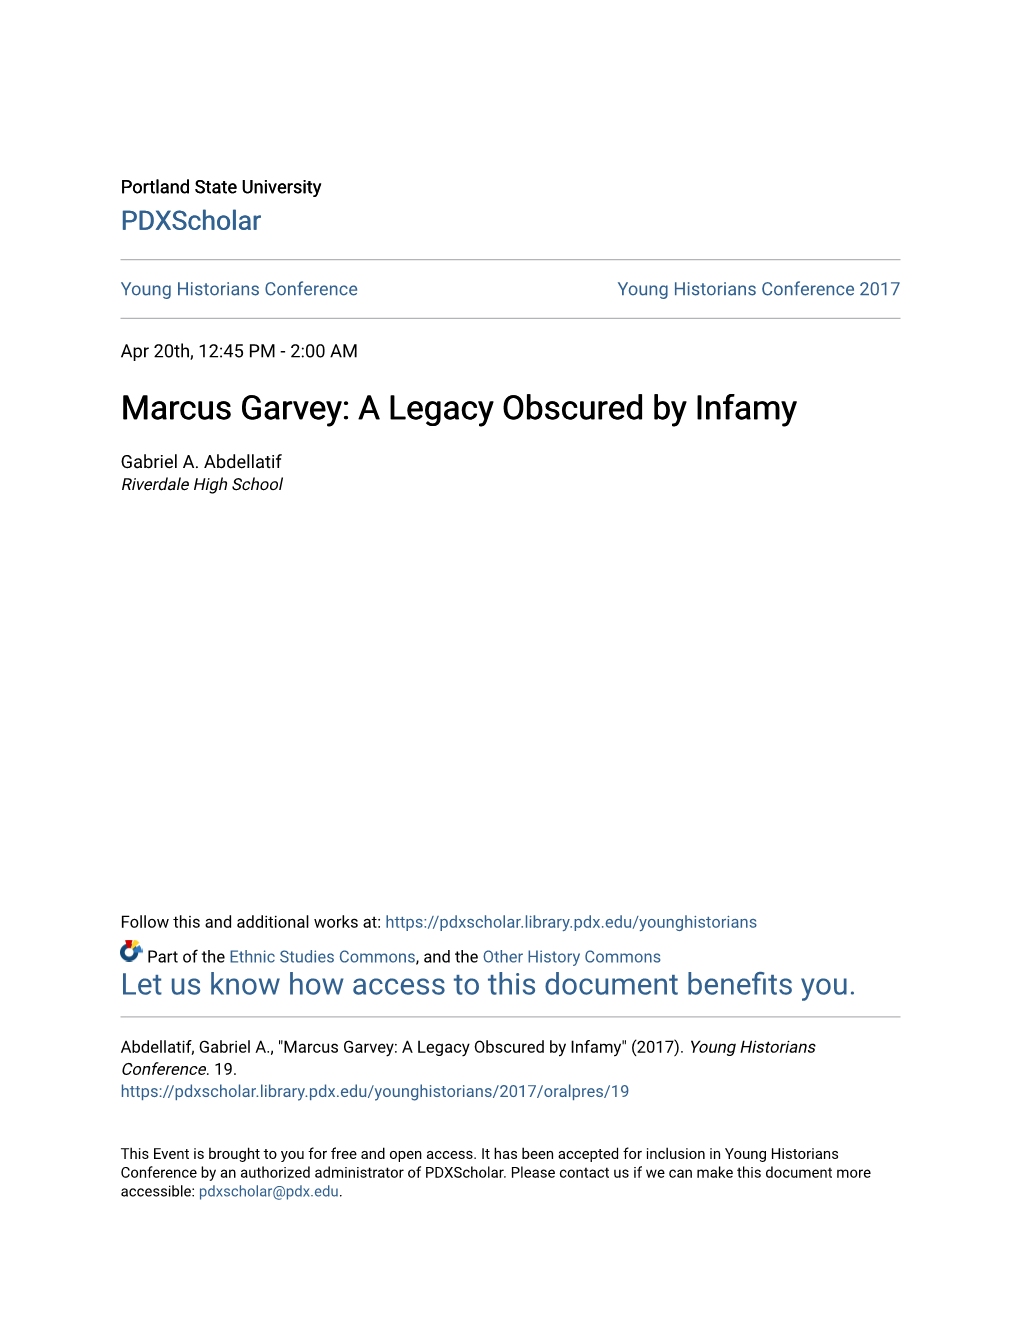 Marcus Garvey: a Legacy Obscured by Infamy